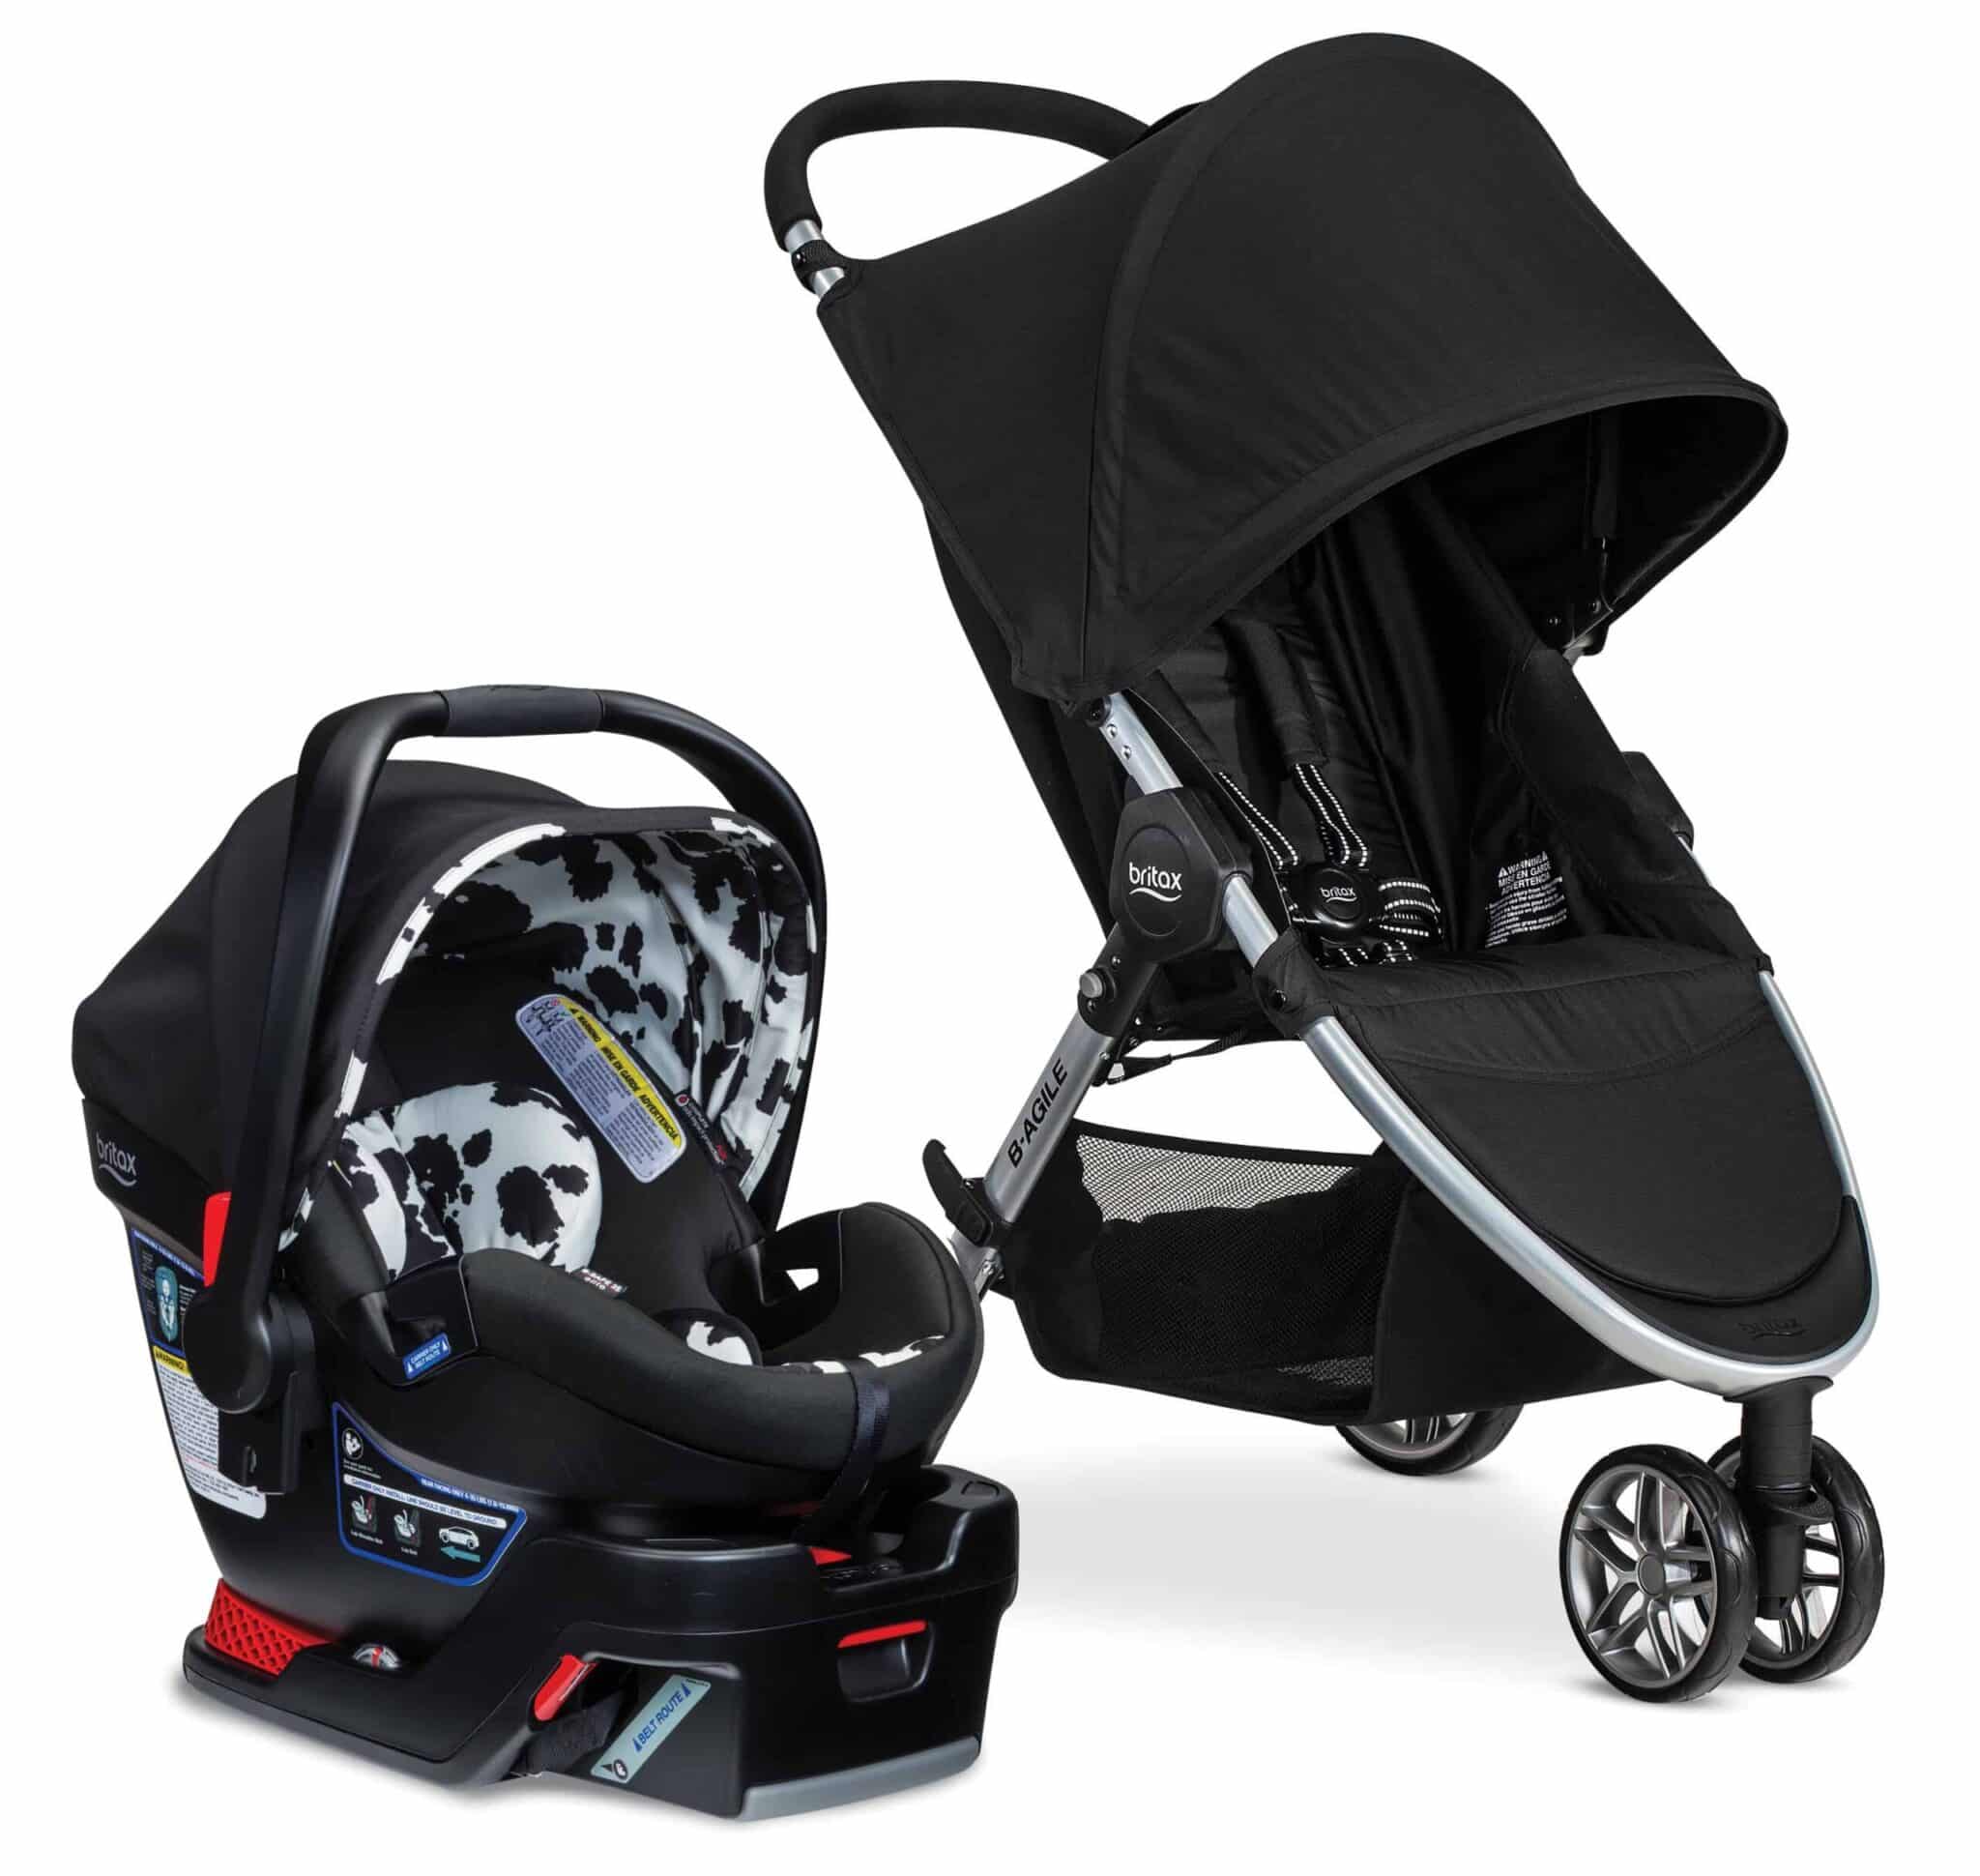 The Best Stroller And Car Seat Combo, Car Seat And Stroller Combo